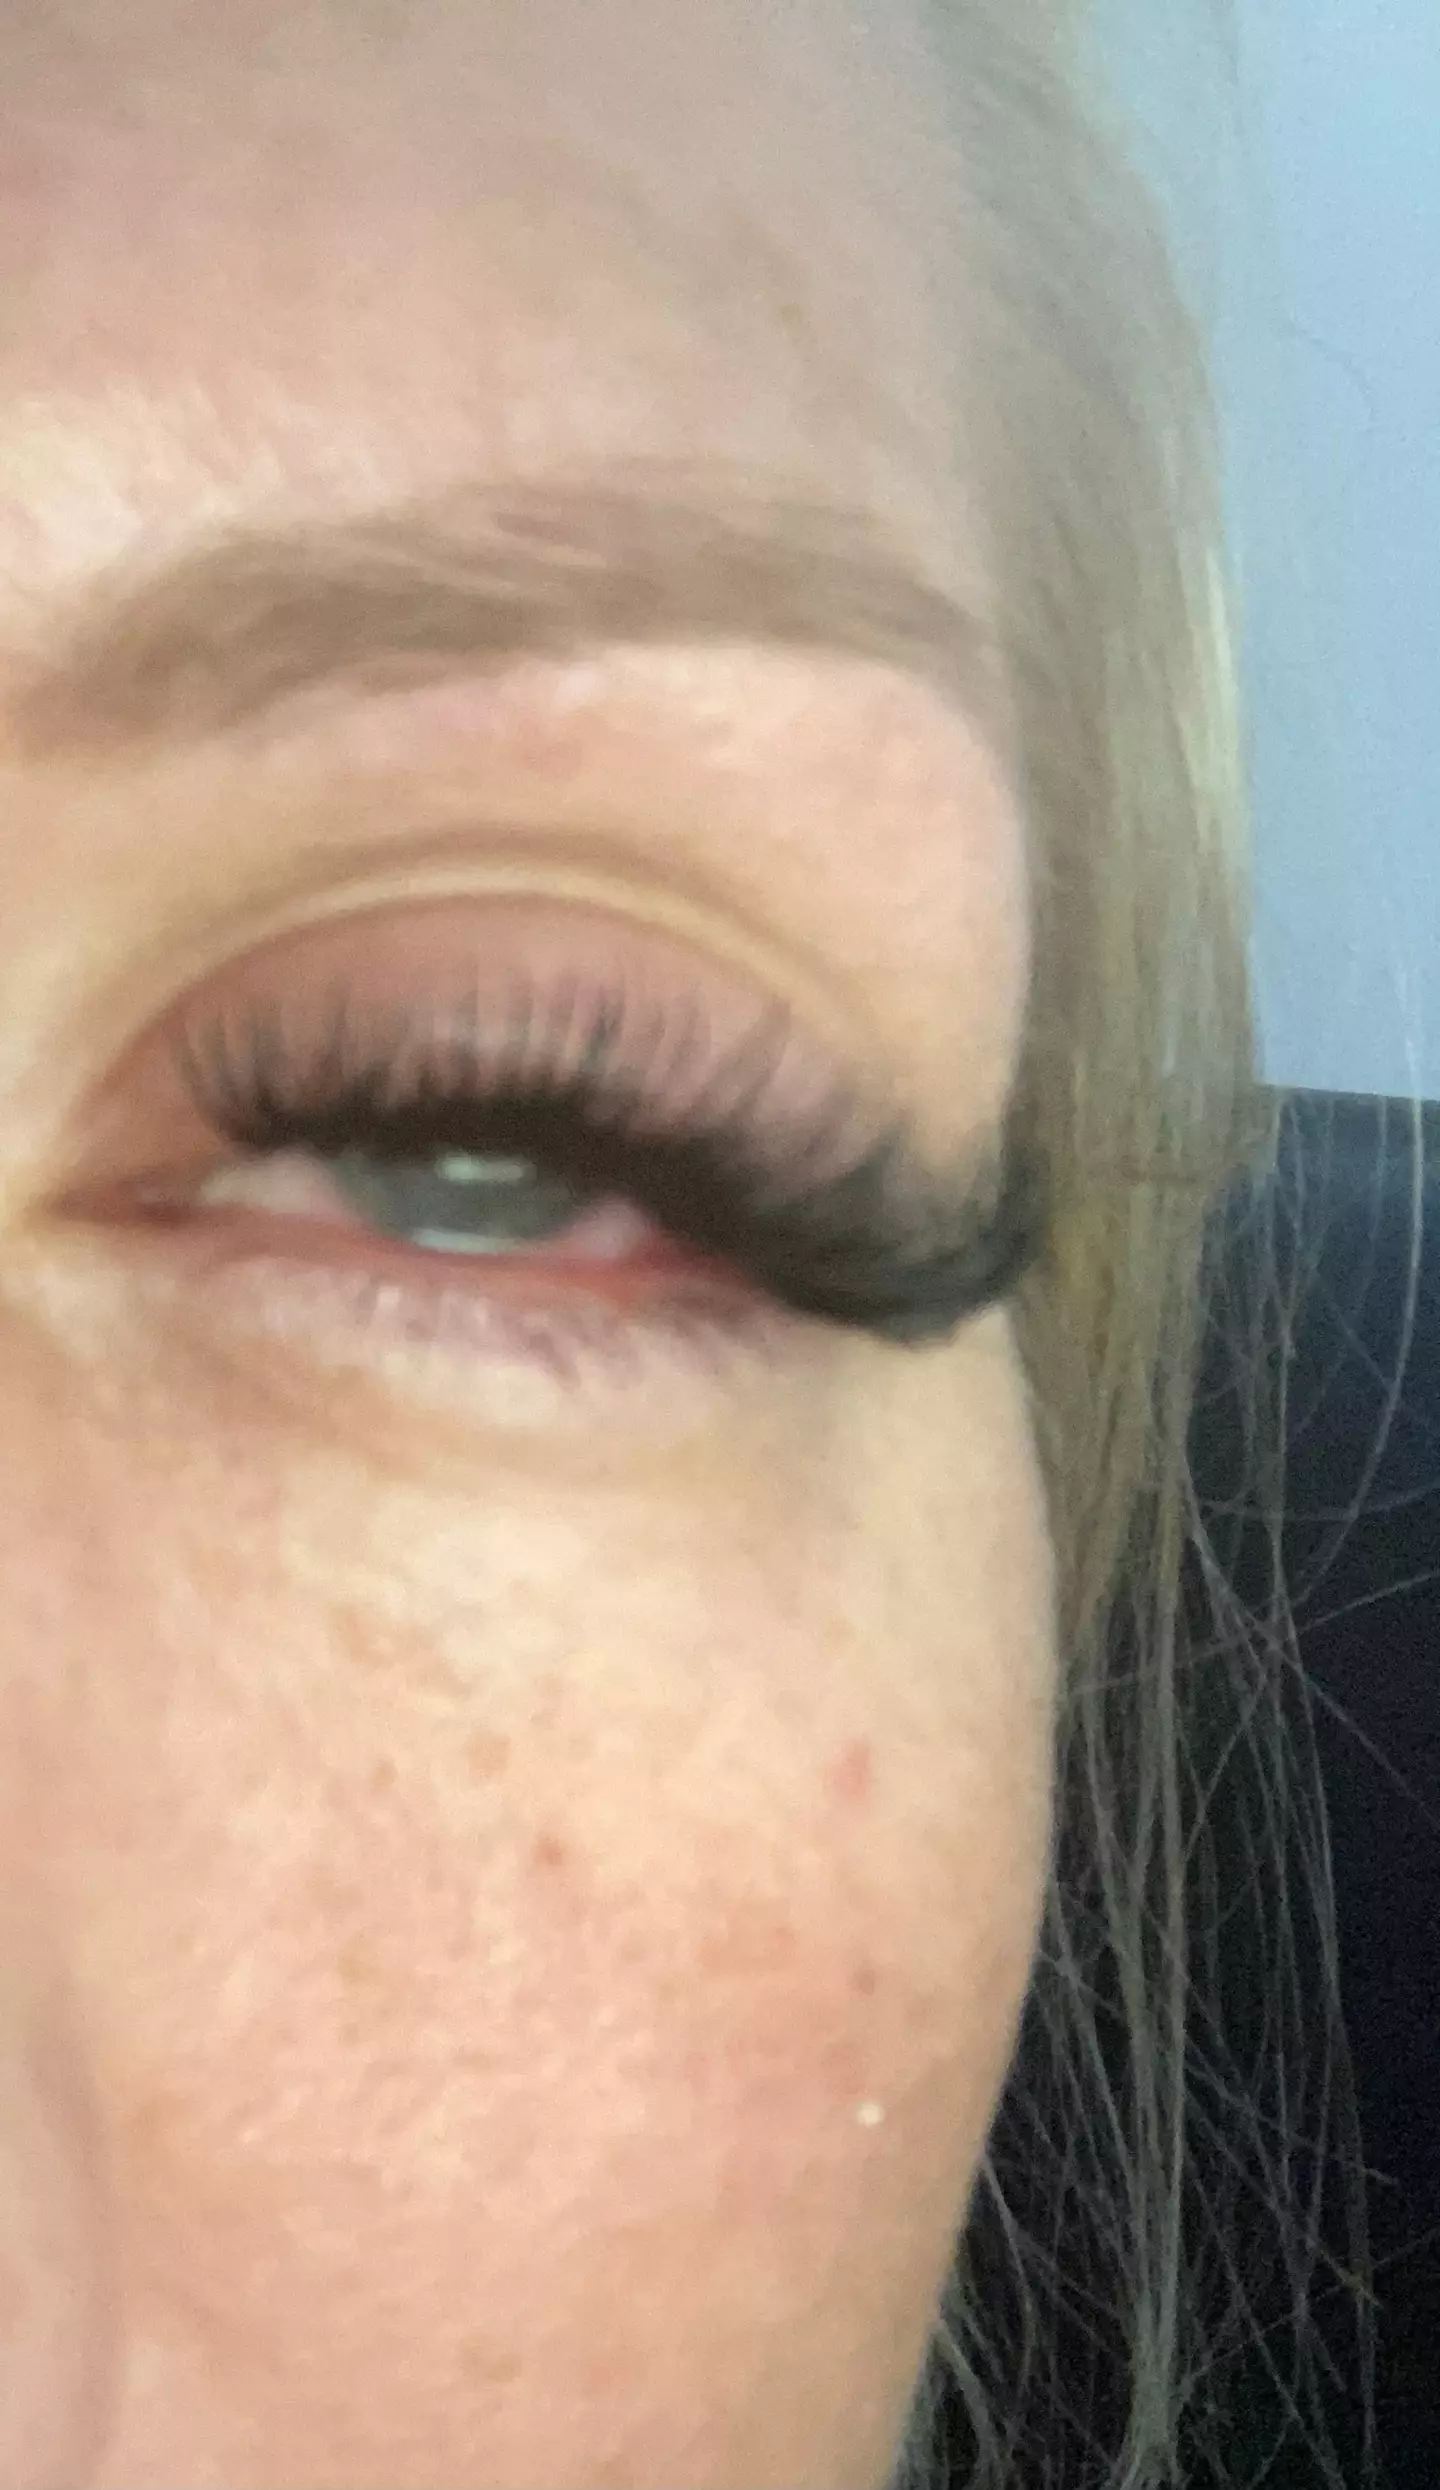 A&E doctors told her to immediately have the lashes removed but the beautician refused to help her or refund her (